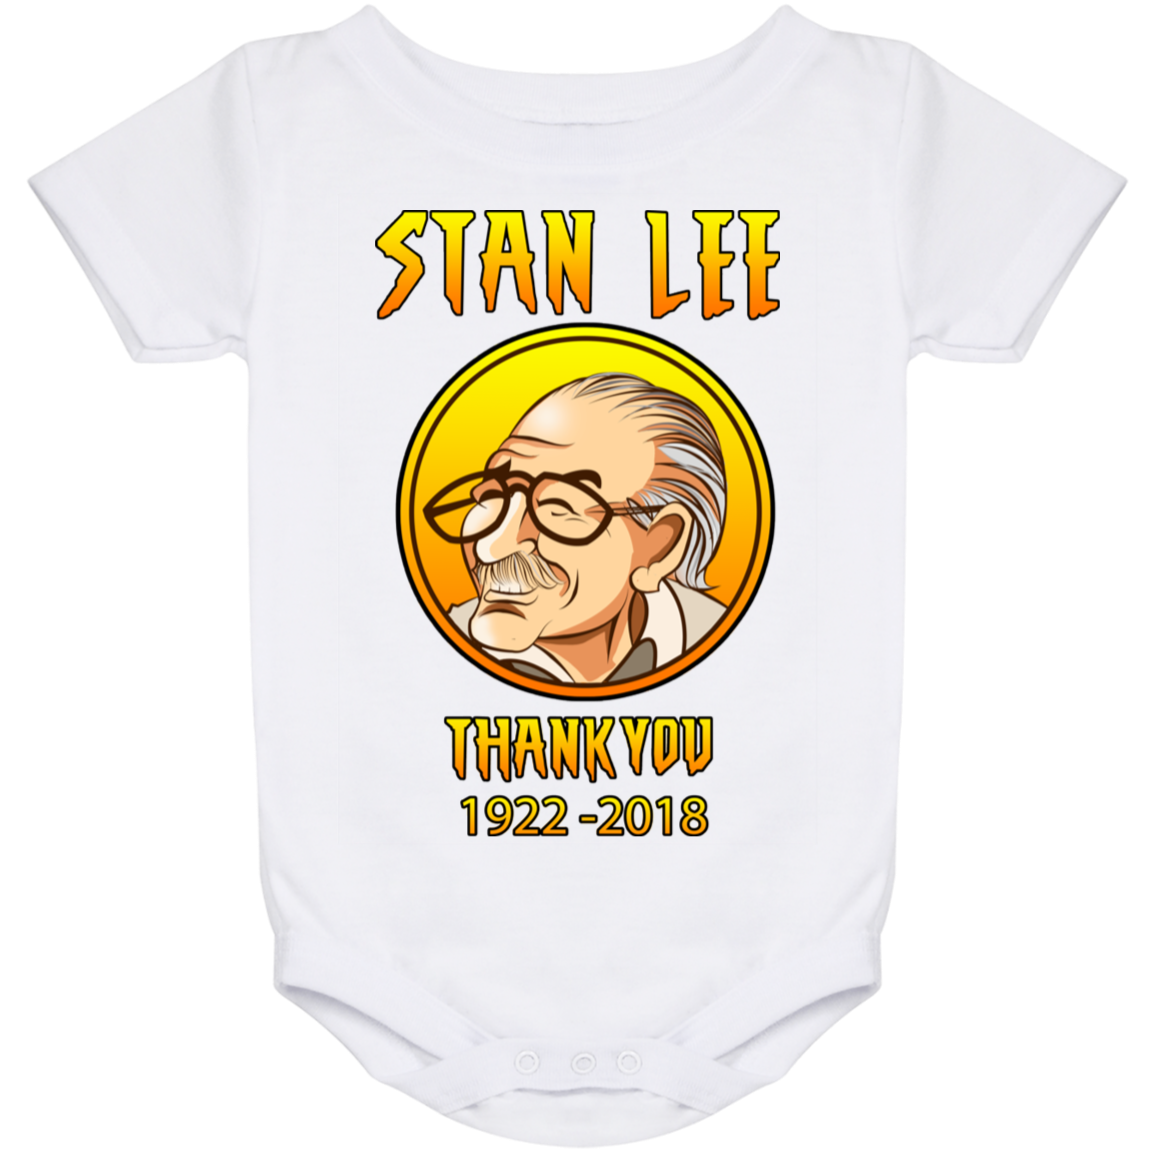 ArtichokeUSA Character and Font design. Stan Lee Thank You Fan Art. Let's Create Your Own Design Today. Baby Onesie 24 Month